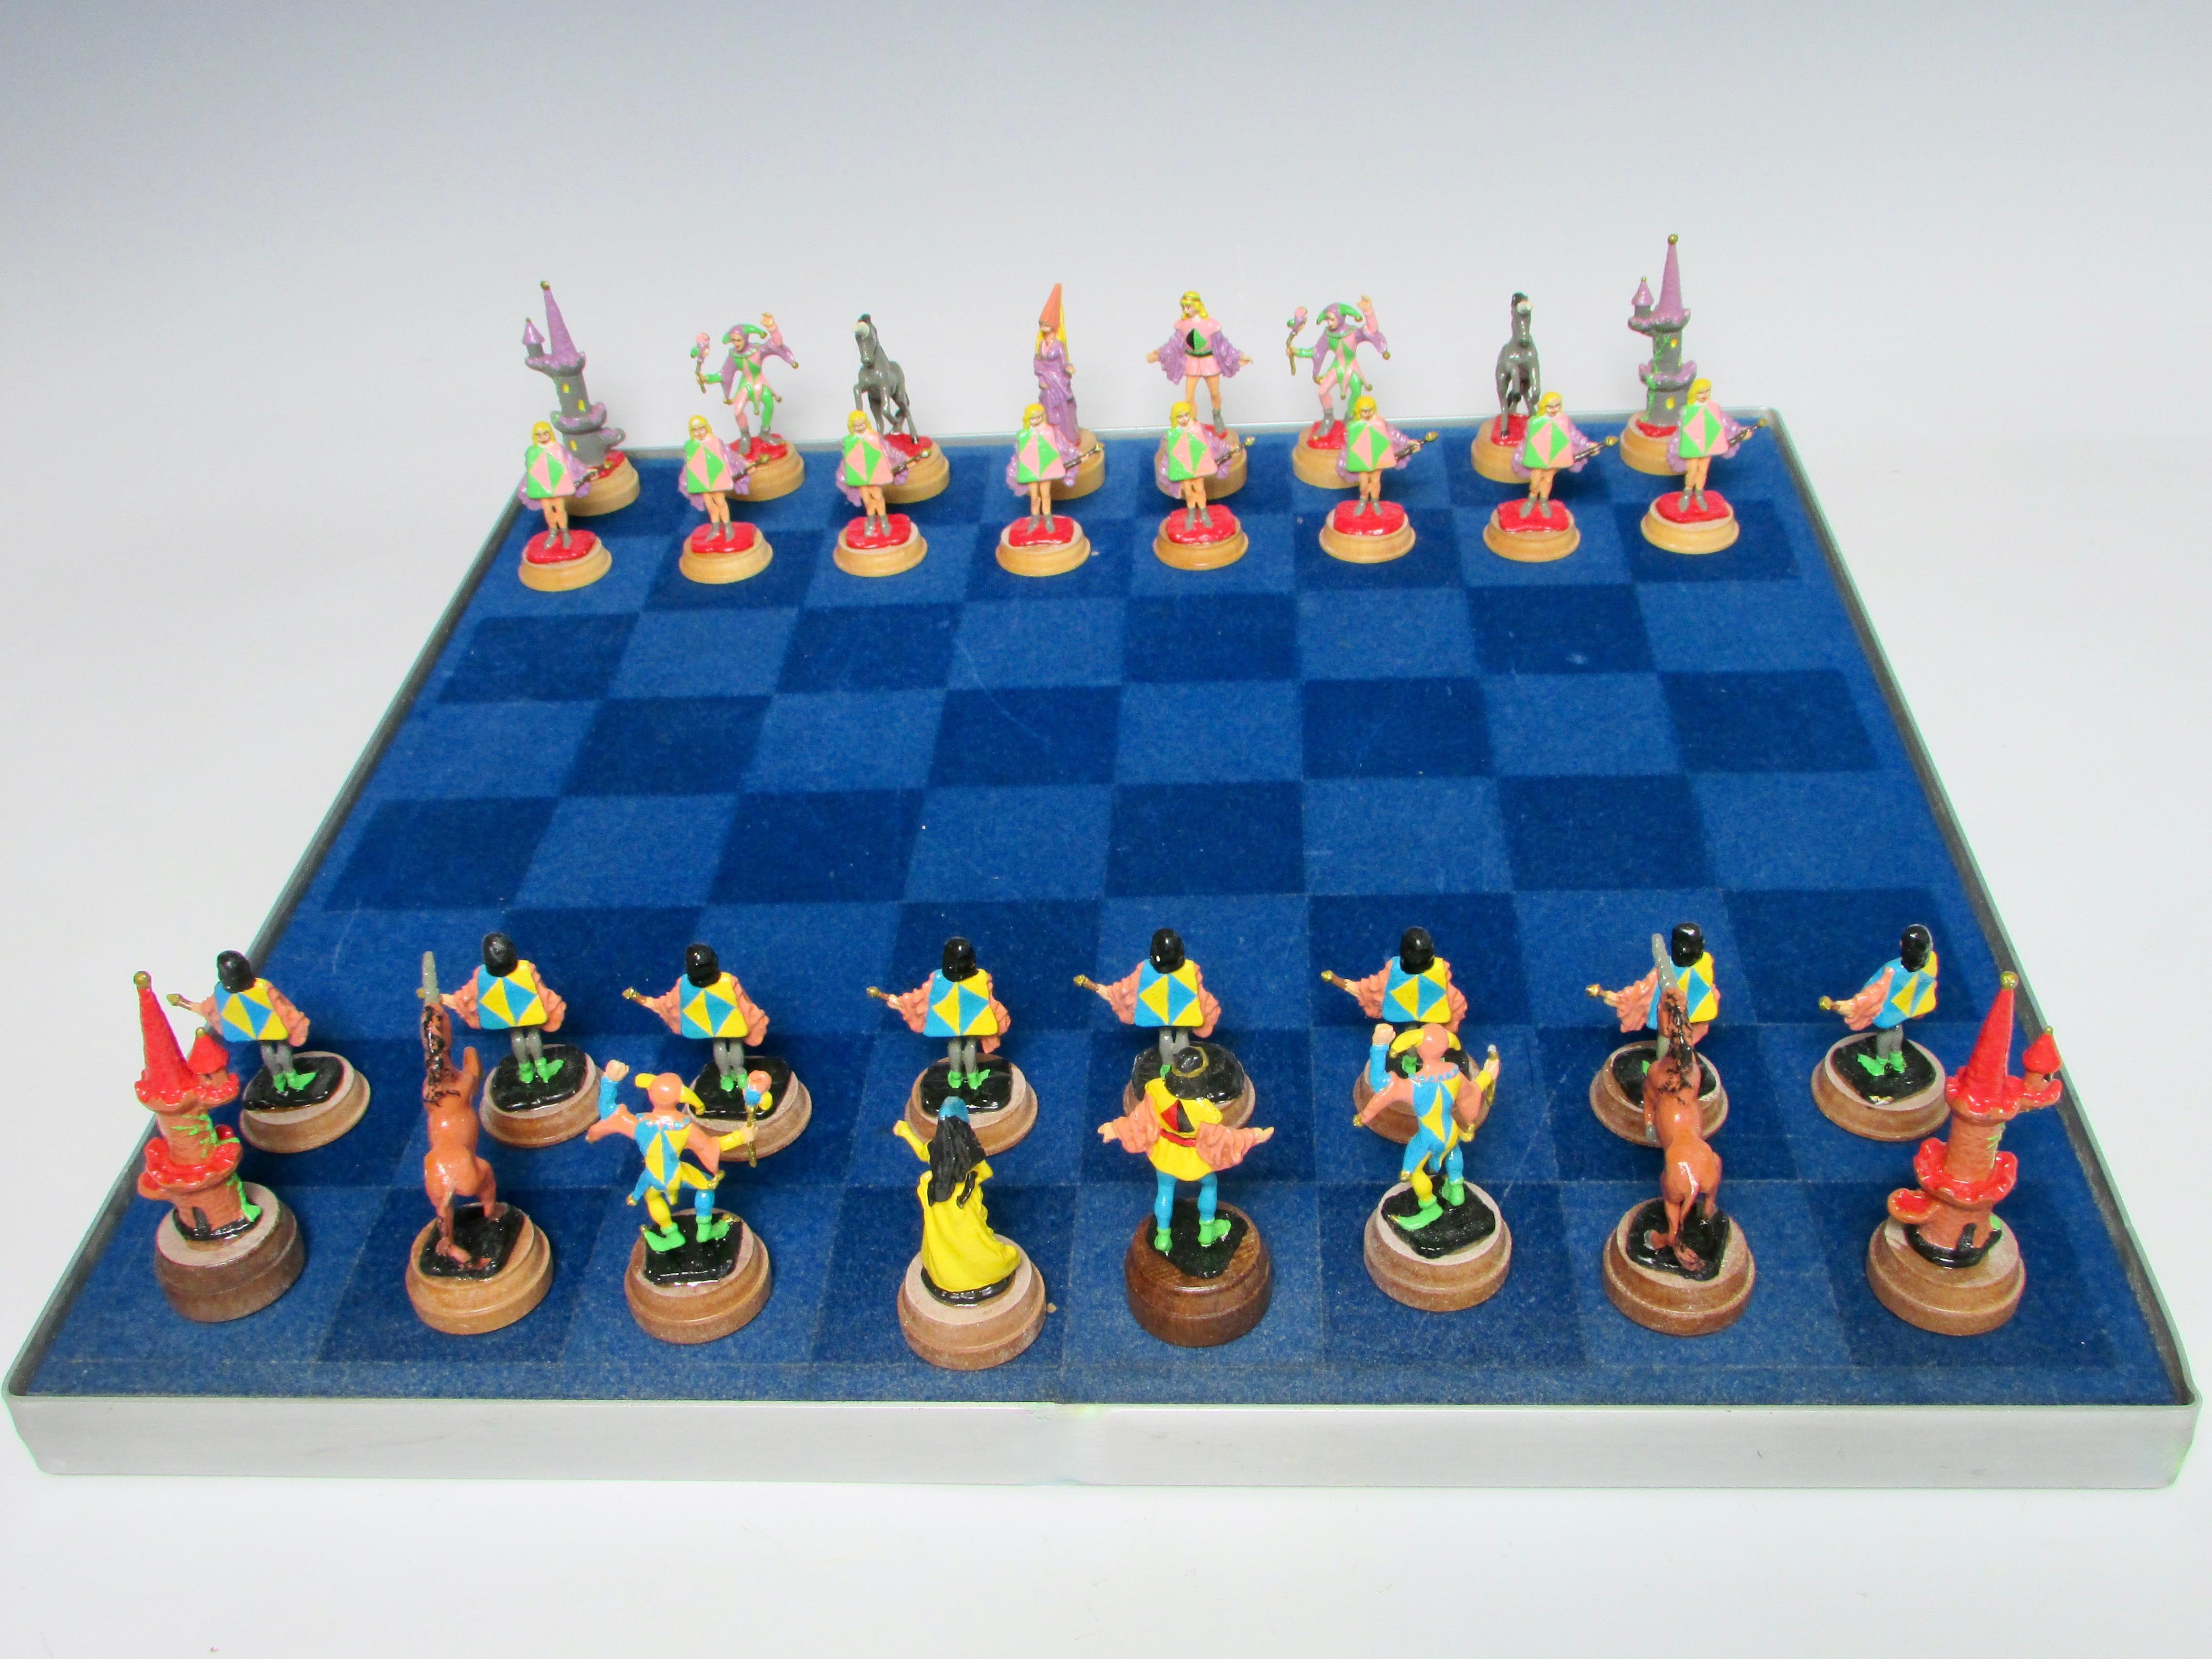 20th Century Hand Painted Fantasy Chess Pieces with Kings Queens Jesters Castles Unicorns For Sale